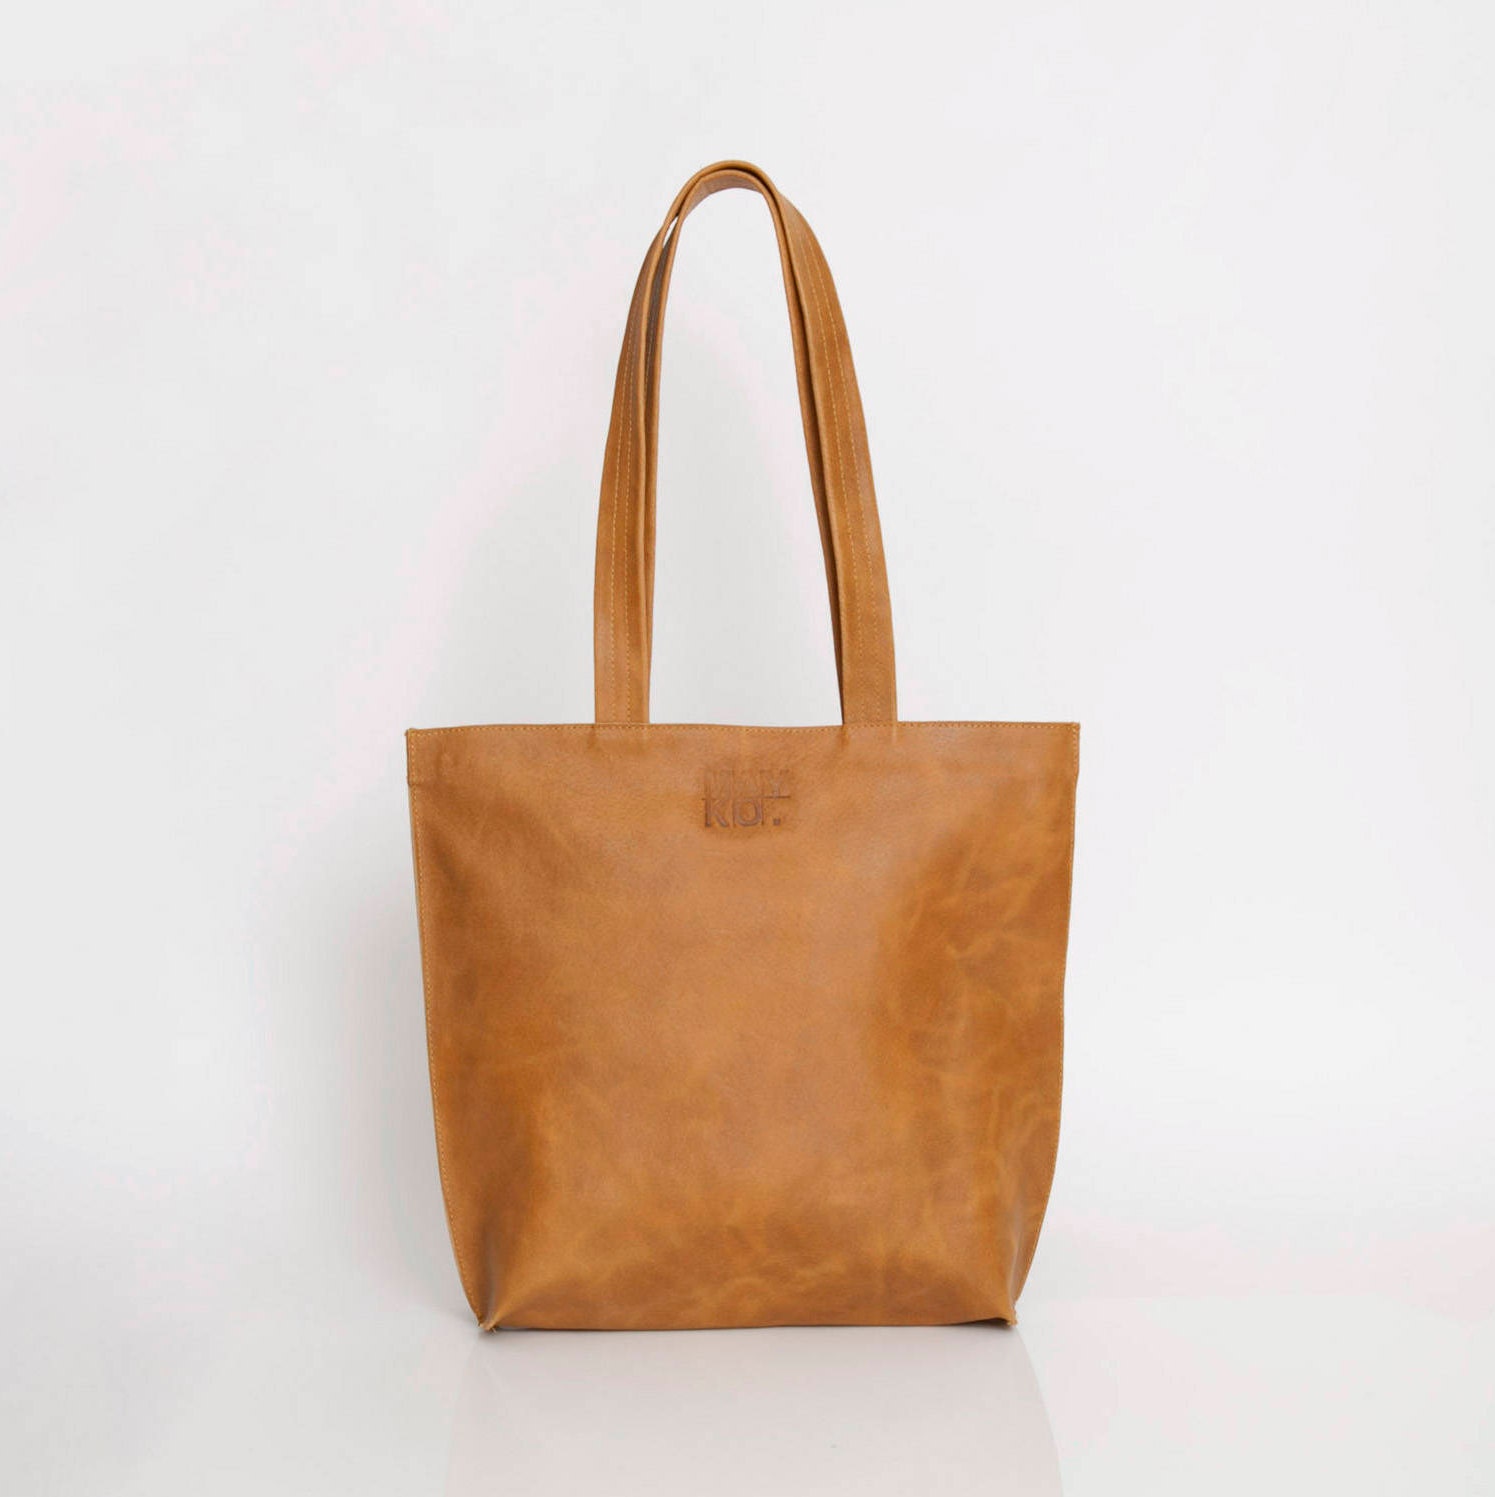 Tan Leather Bag Personalized Bag Leather Tote Bag Leather